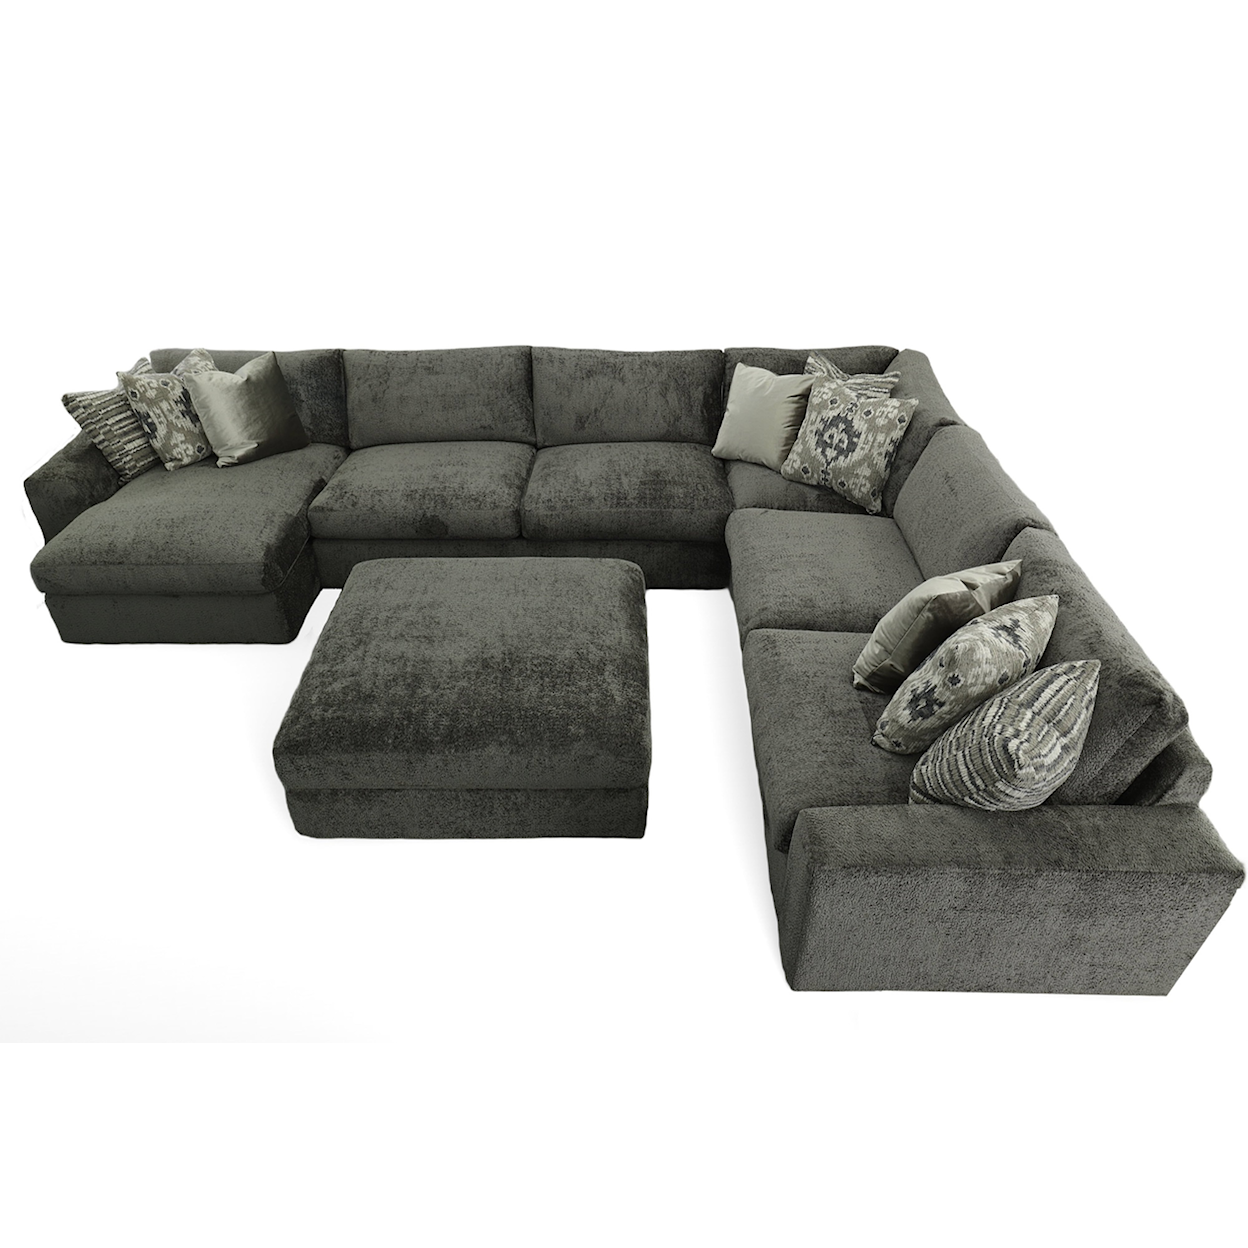 Stanton 541 4 Piece Chaise Sectional